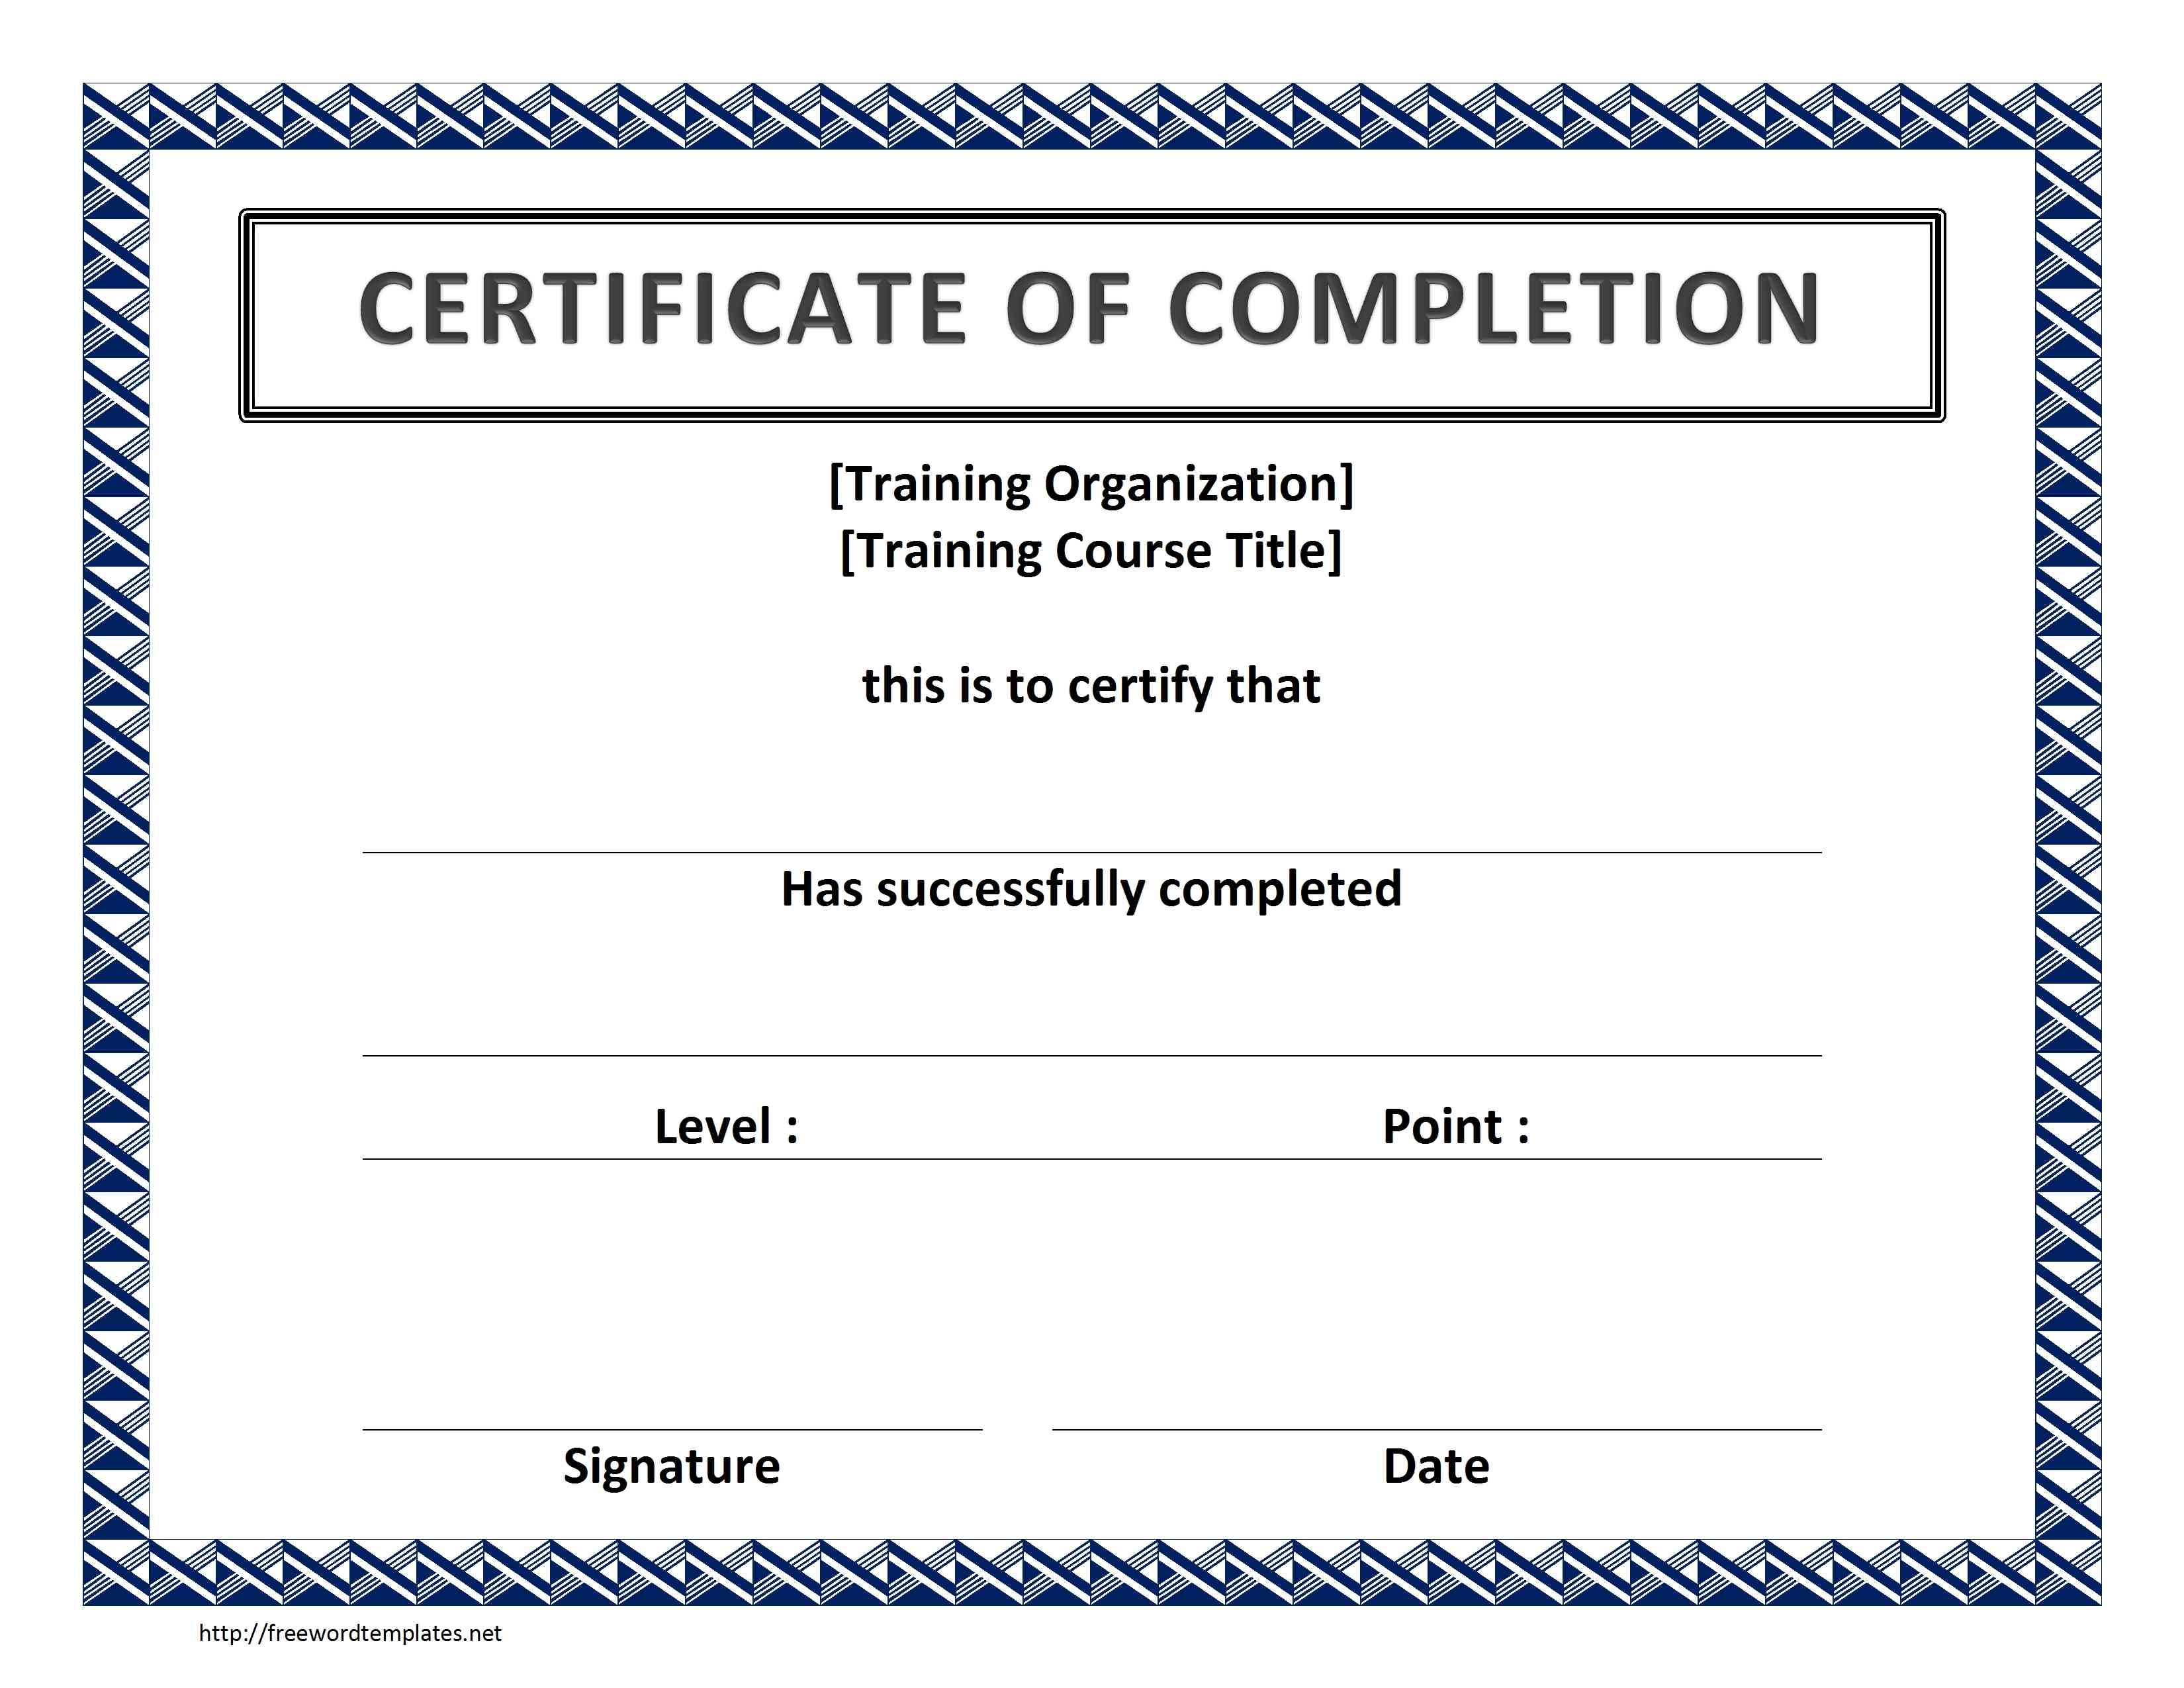 certificate-of-completion-template-free-printable-documents